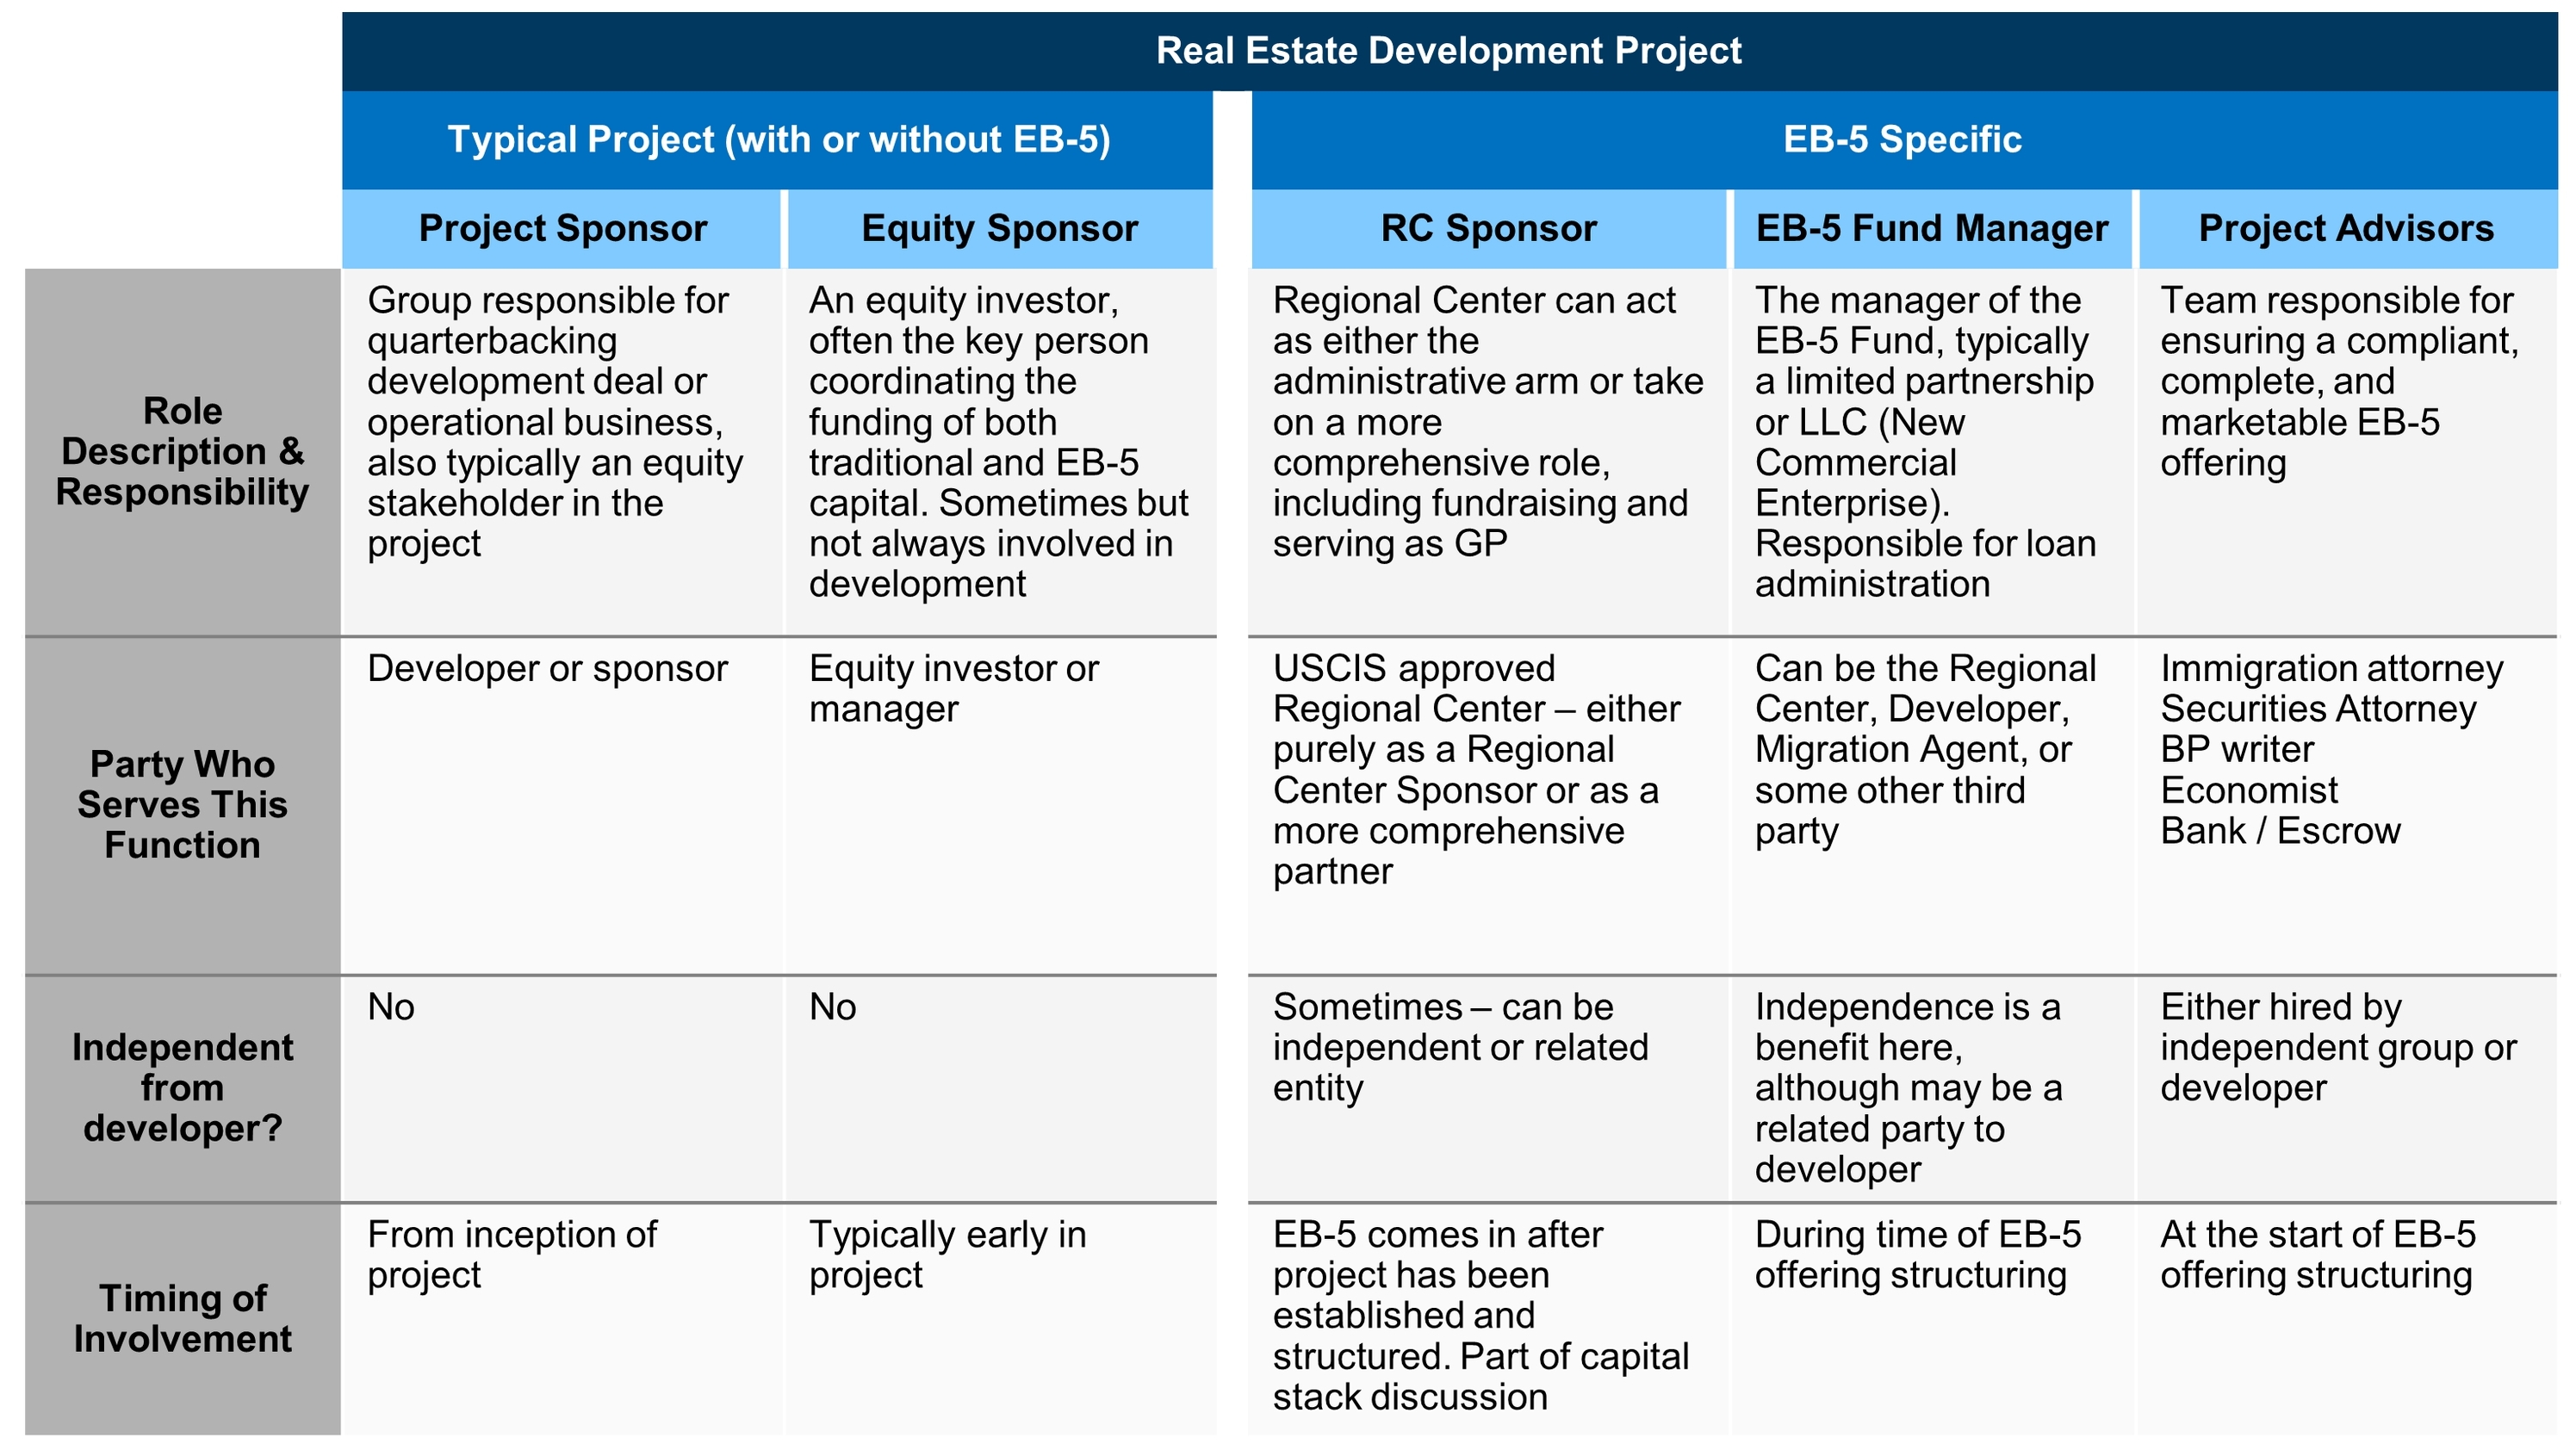 Chart showing who and what is an involved in a typical versus EB-5 specific real estate development project.